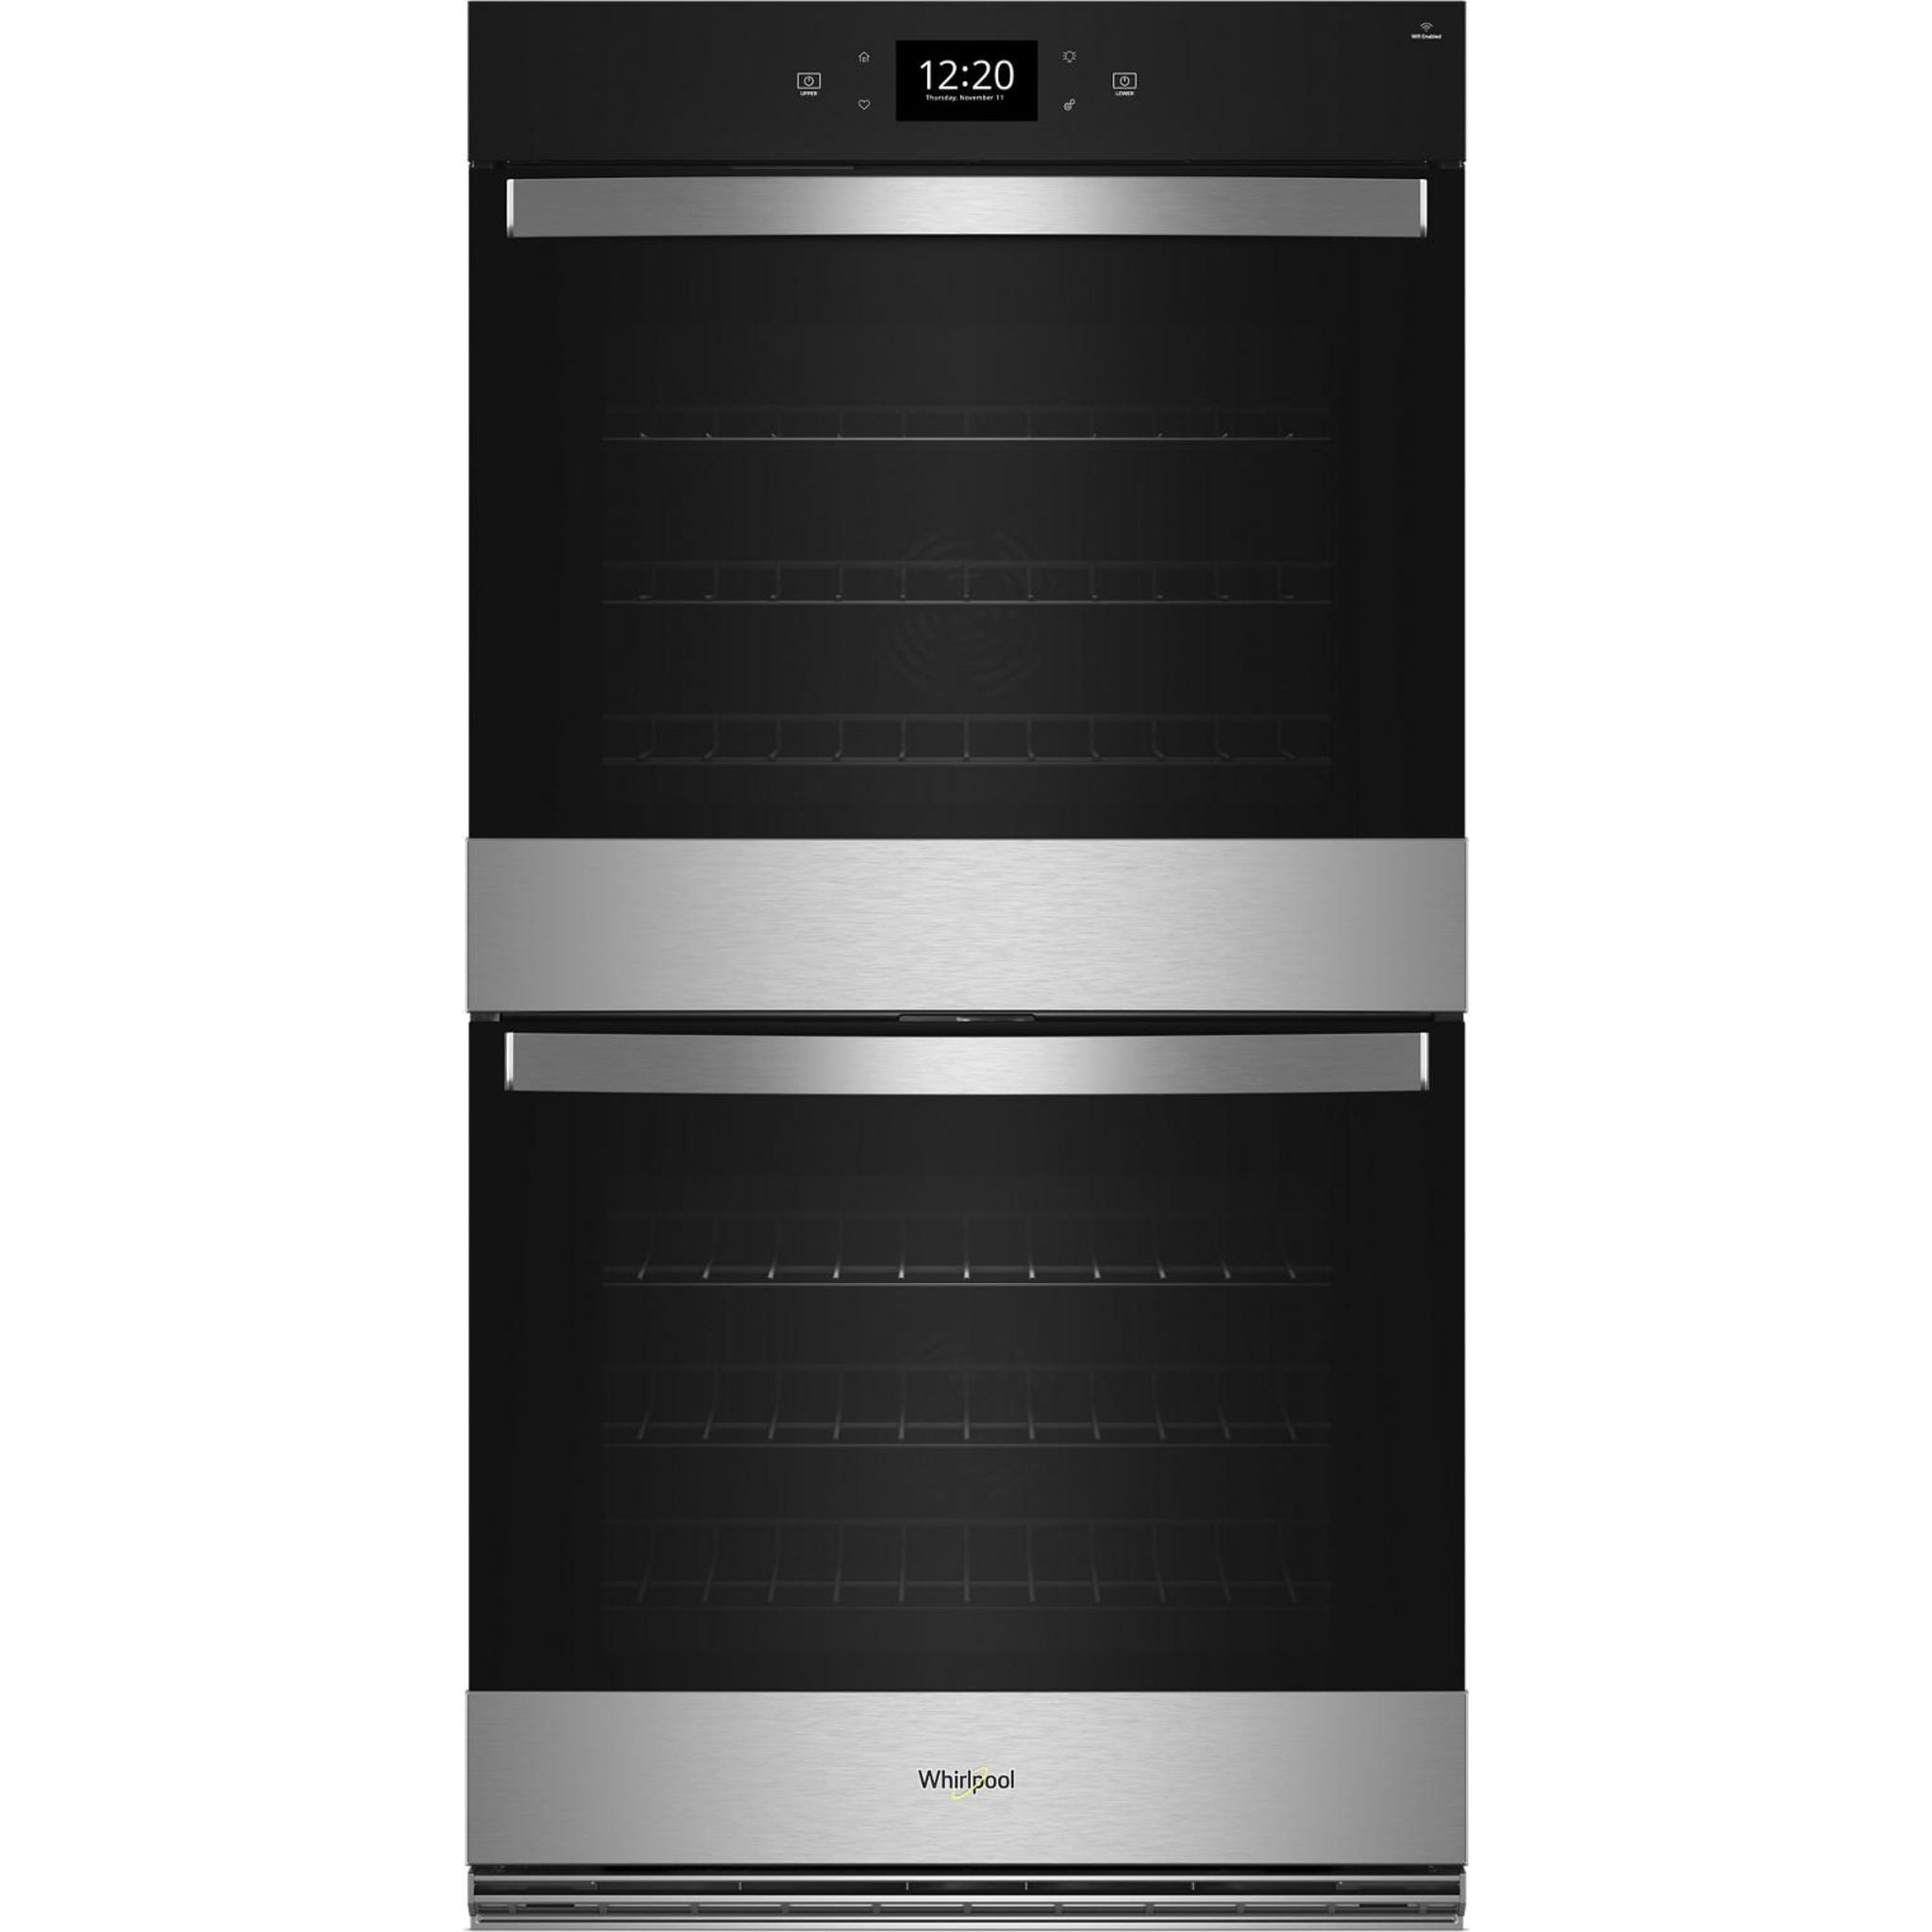 Whirlpool, 30" True Convection Wall Oven (WOED7030PZ) - Fingerprint Resistant Stainless Steel